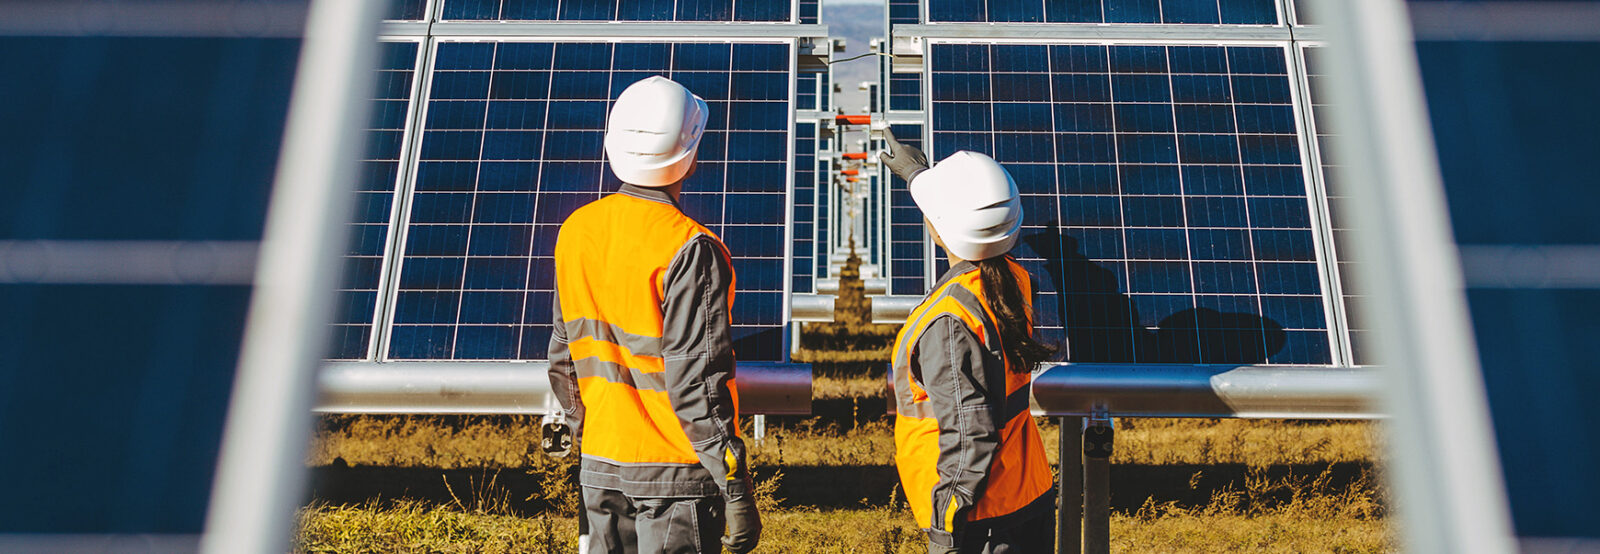 The picture shows a woman and a man from behind, wearing work clothes standing in a solar park . Both look towards the facility, which the woman points to.